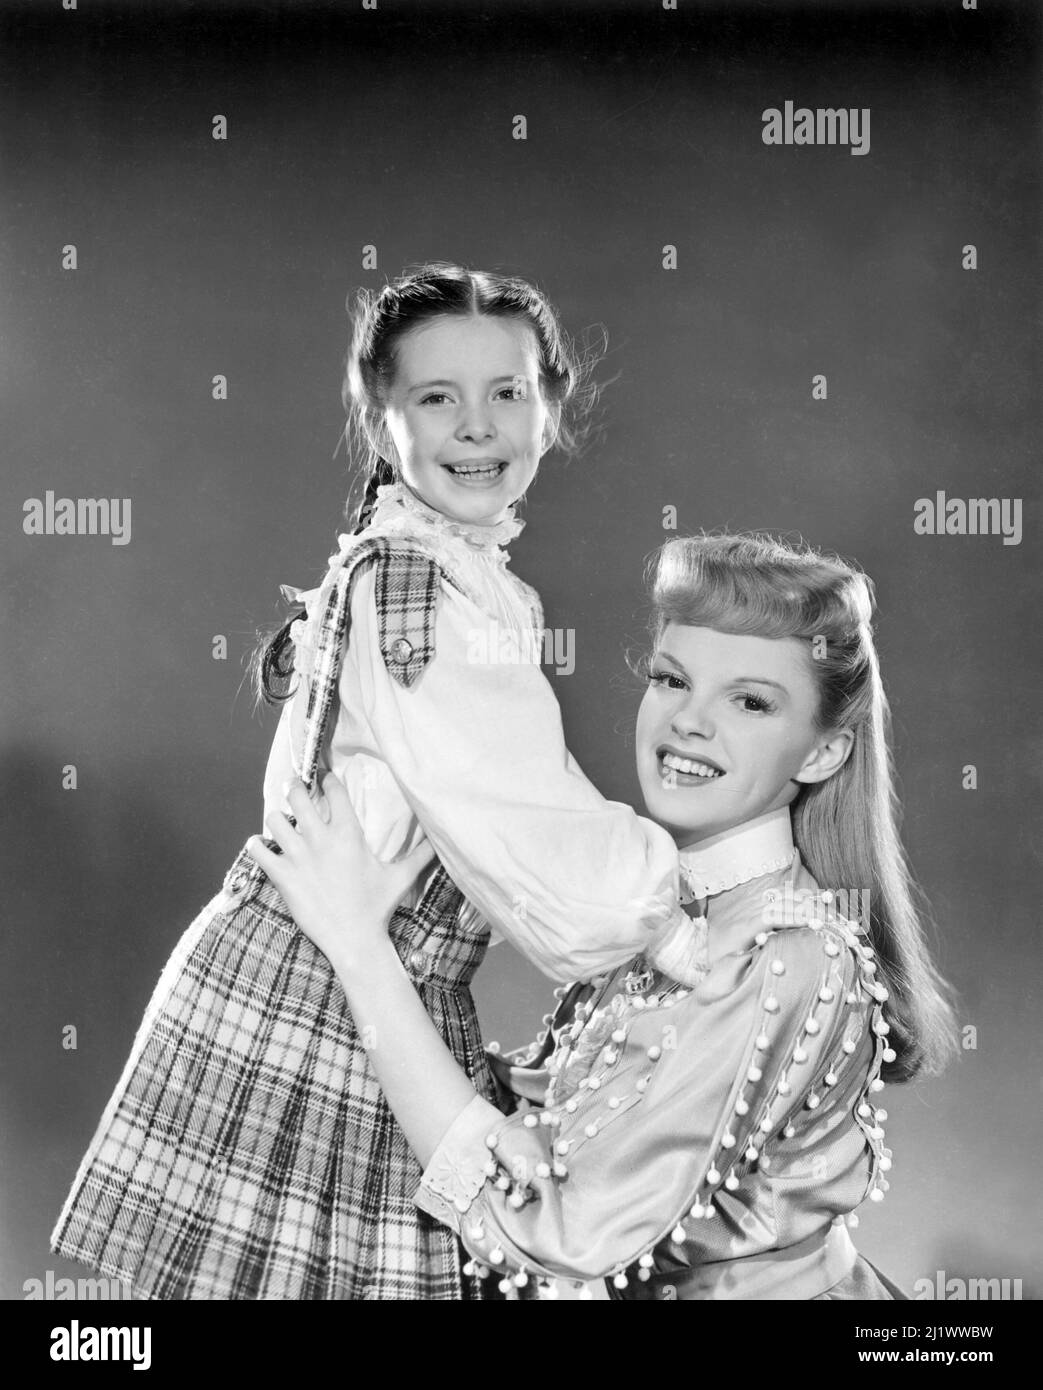 JUDY GARLAND and MARGARET O'BRIEN in MEET ME IN ST. LOUIS (1944), directed by VINCENTE MINNELLI. Credit: M.G.M. / Album Stock Photo